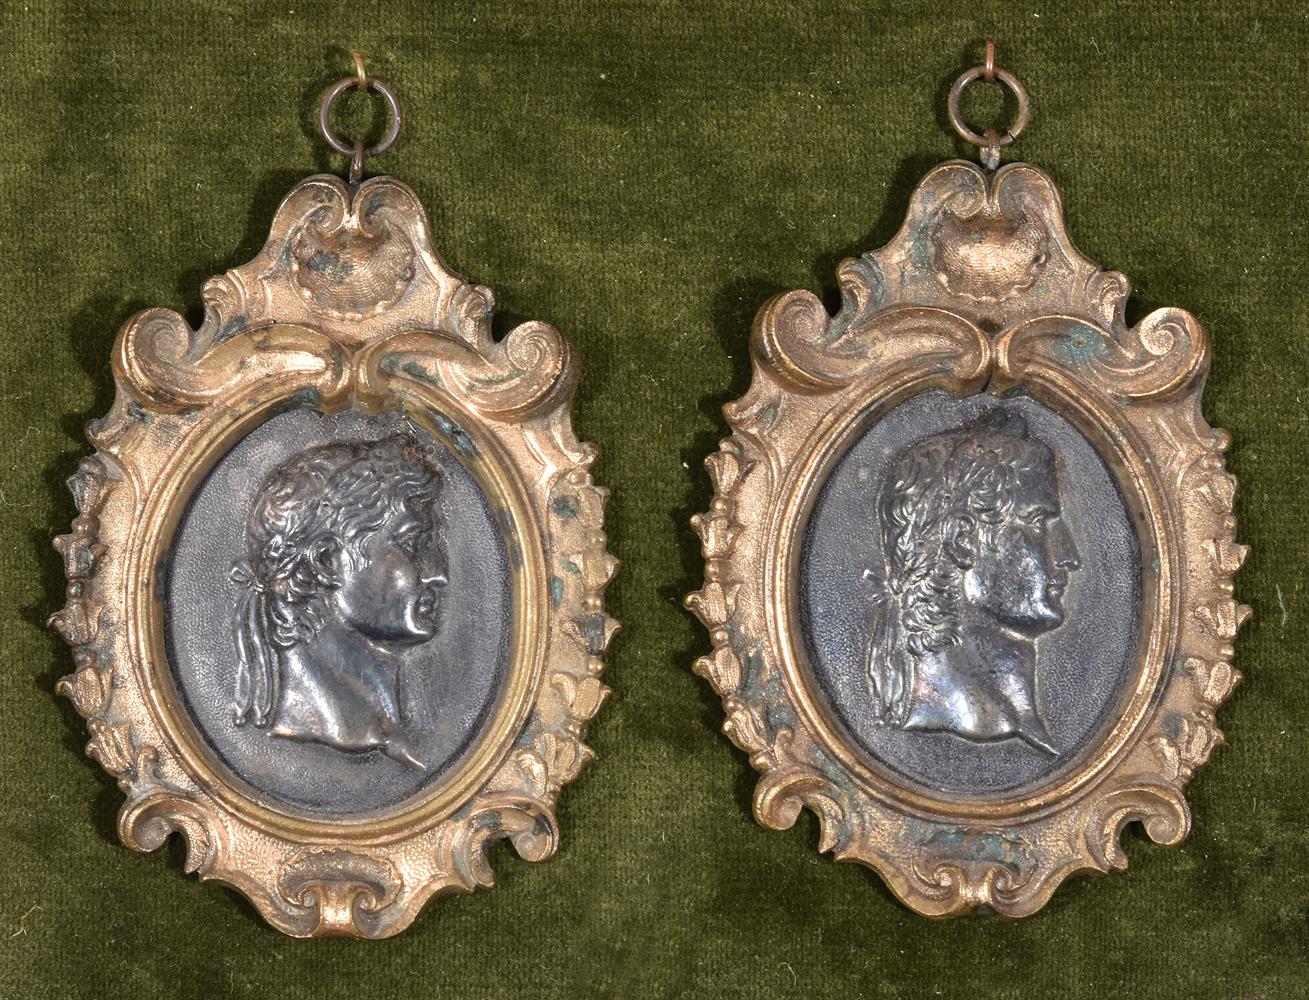 A SET OF SEVEN 'GRAND TOUR' PORTRAITS OF ROMAN EMPERORS, ITALIAN, LATE 18TH/EARLY 19TH CENTURY - Image 3 of 4